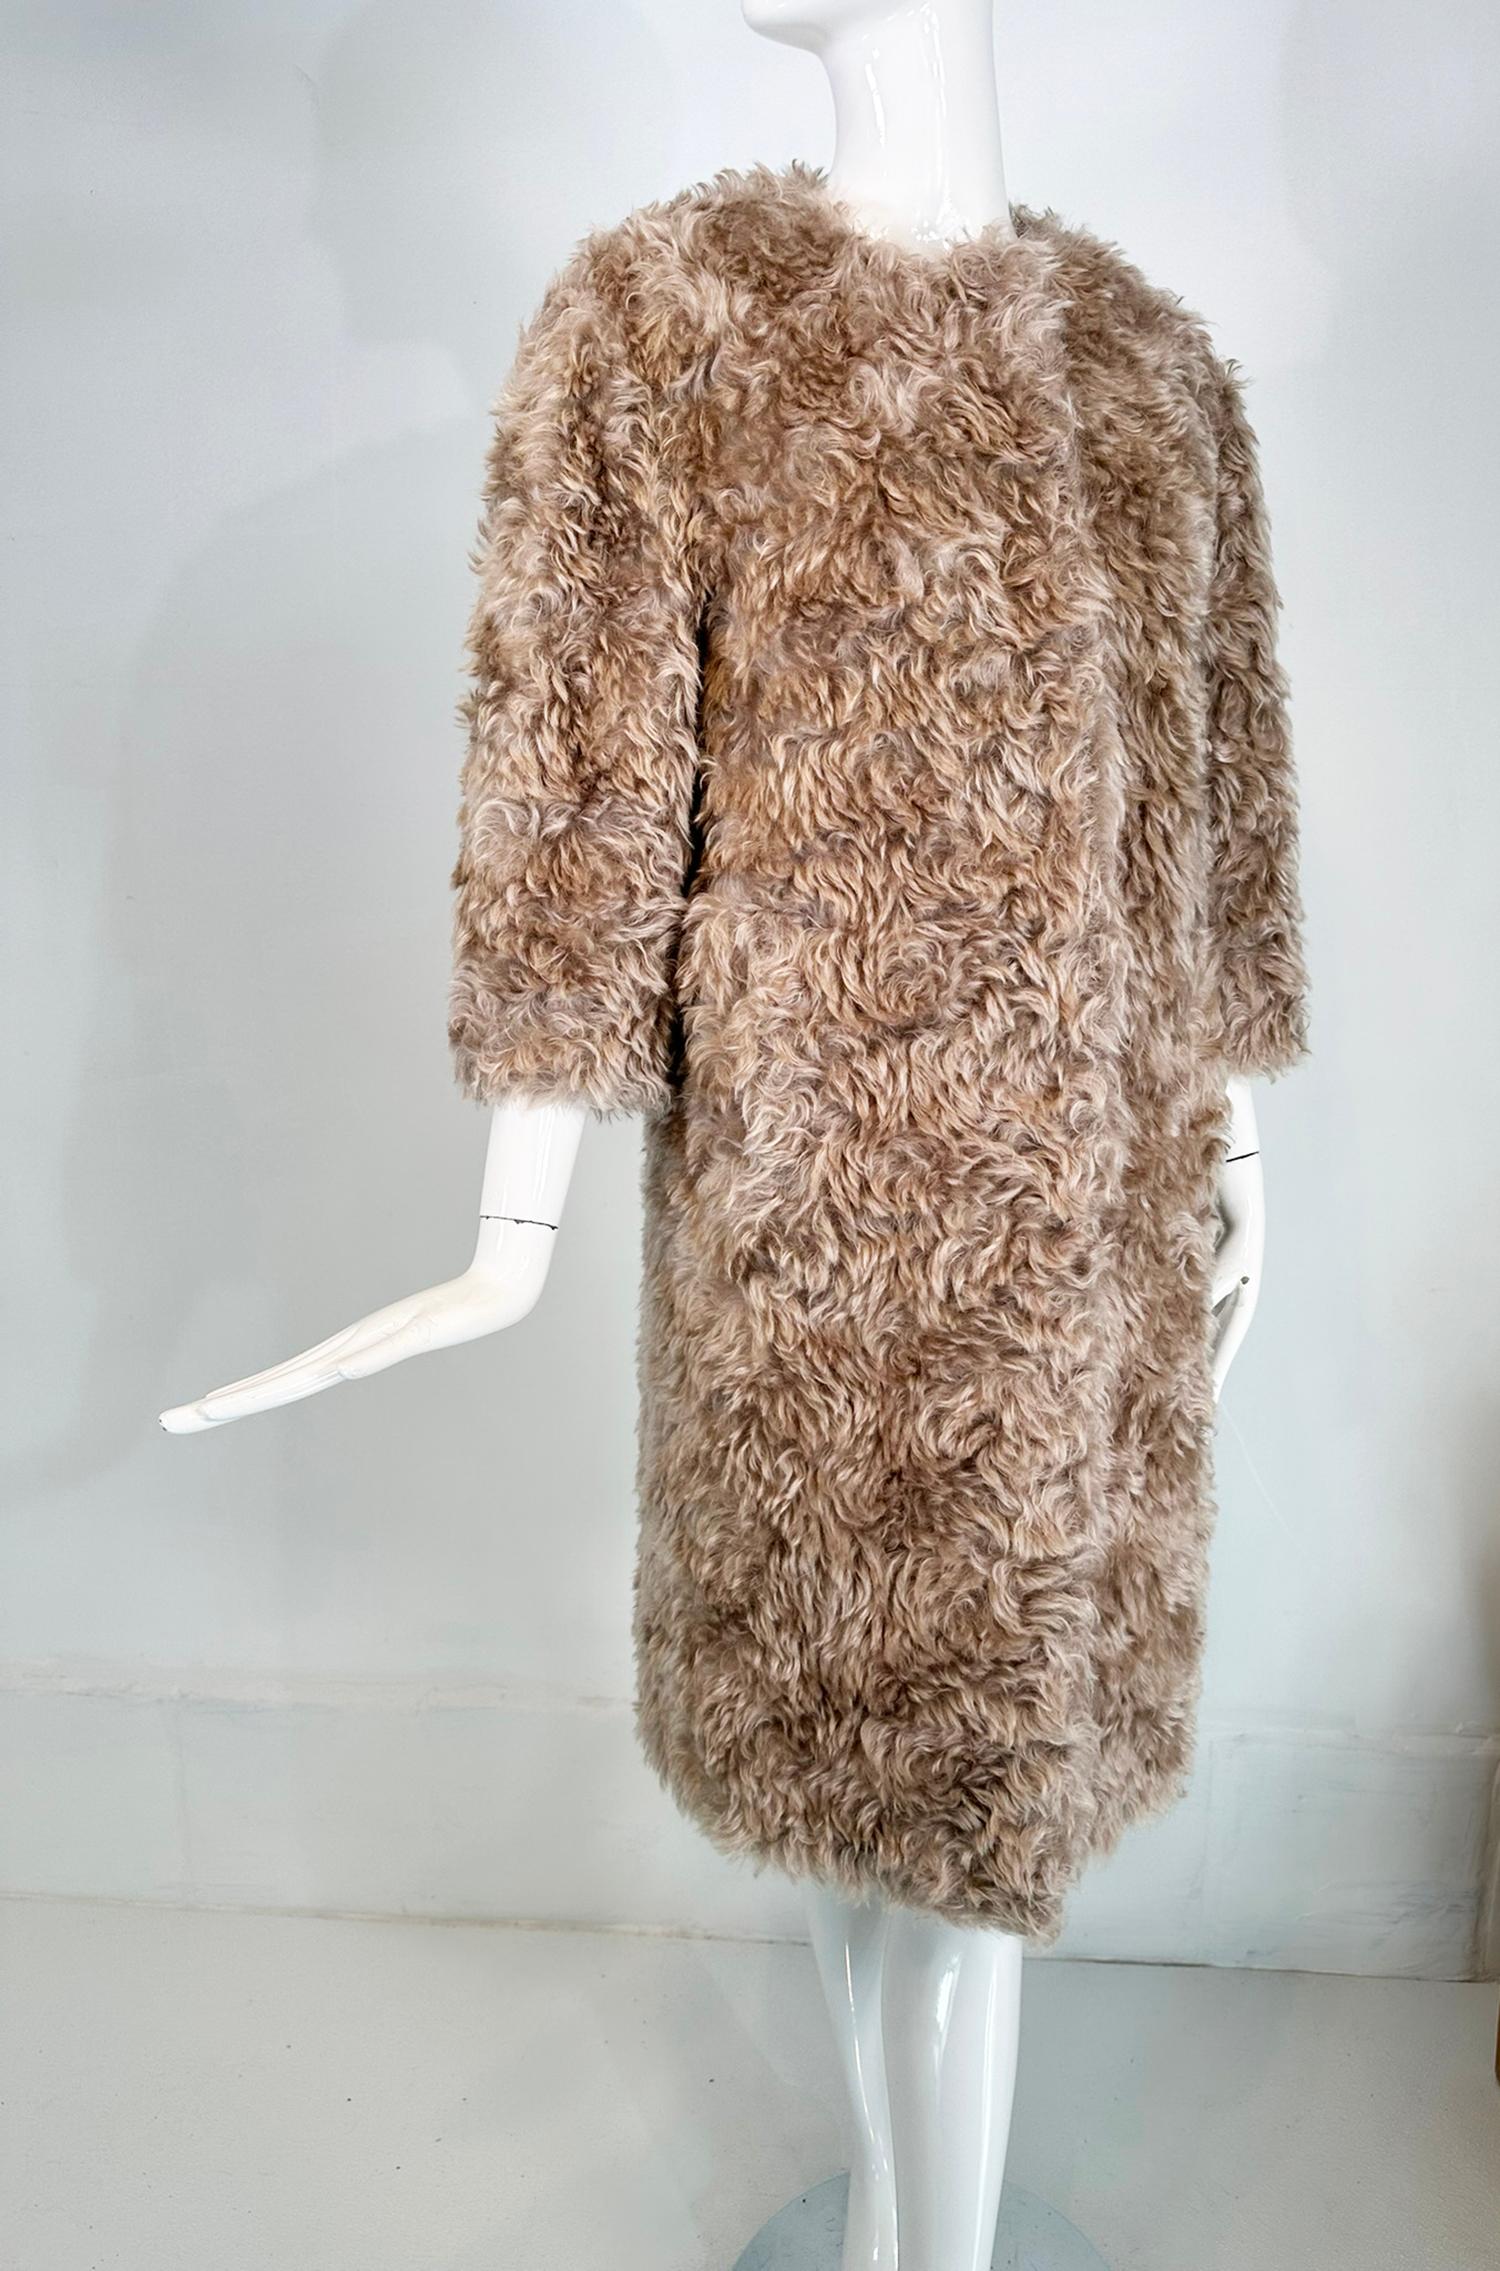 Prada champagne mohair/cotton blend, jewel neck, big snaps closure, faux fur teddy bear coat, marked size 38.
Fun fur in a fluffy curly mohair/cotton blend. Jewel neck (round, no collar), closes at the front with giant snaps. There are hip front